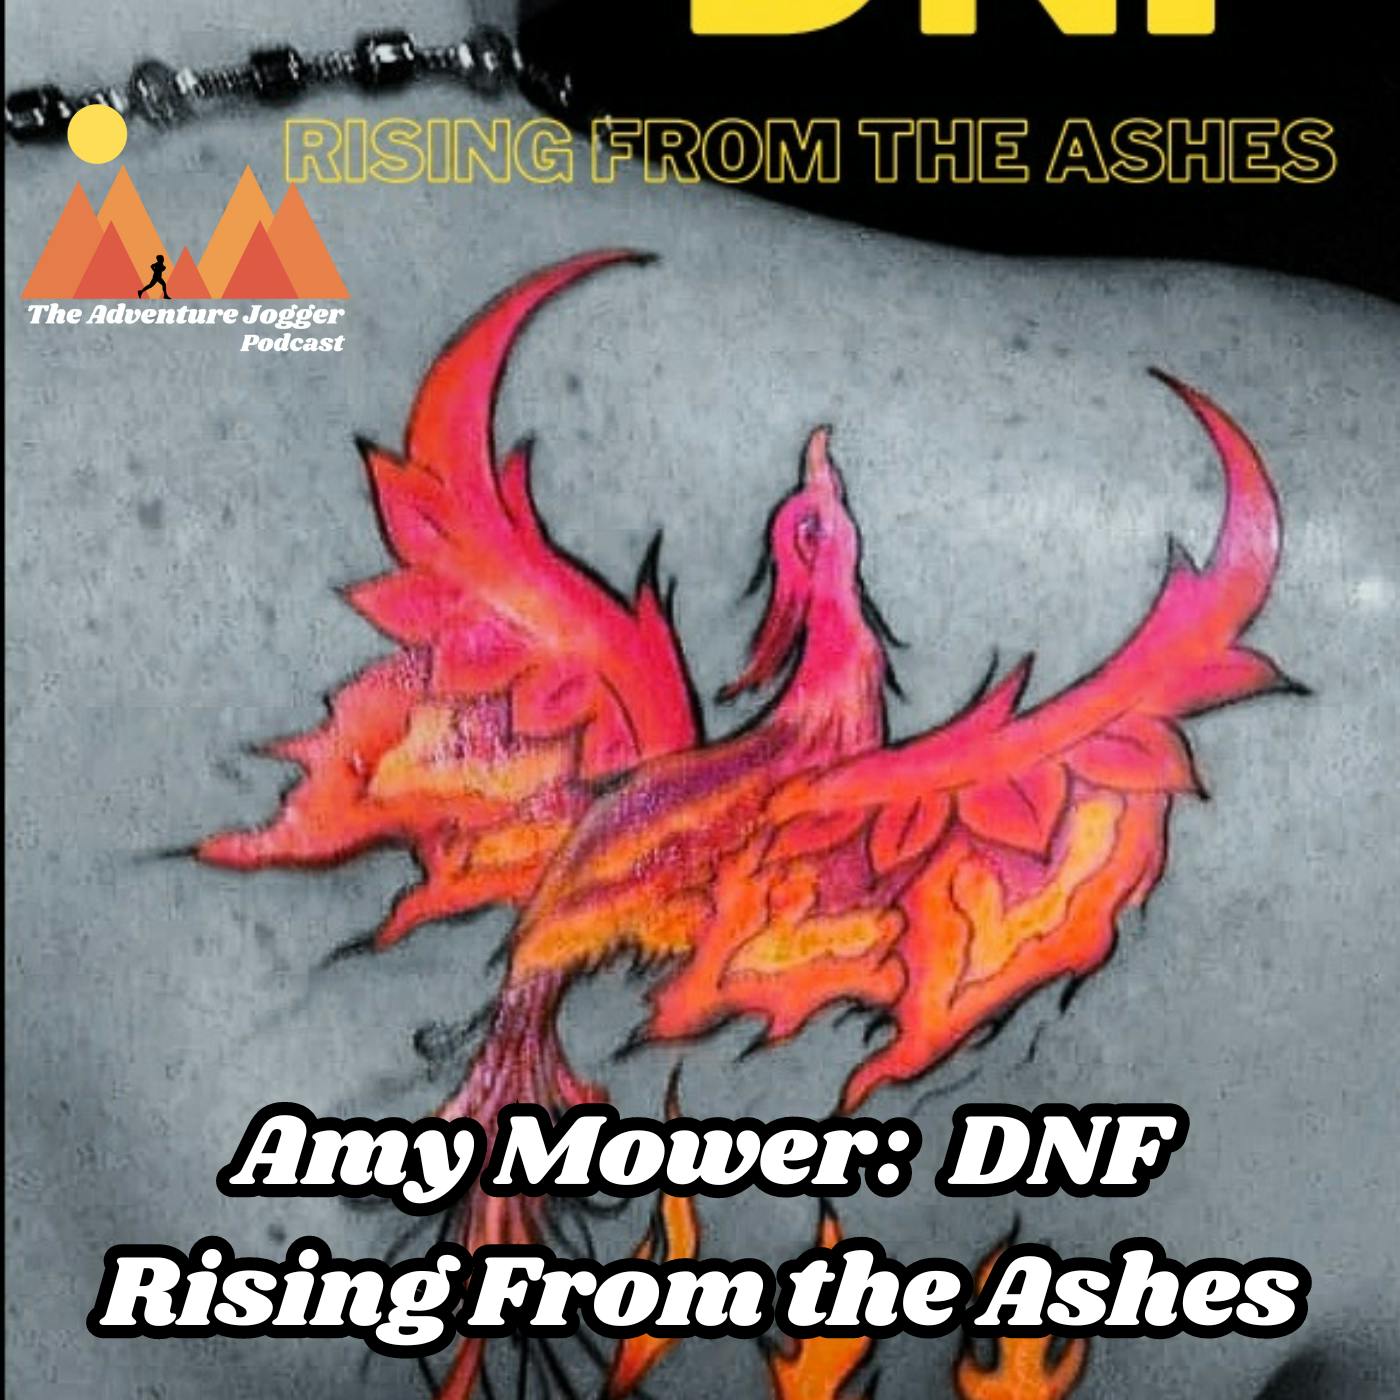 Amy Mower: DNF Rising From The Ashes